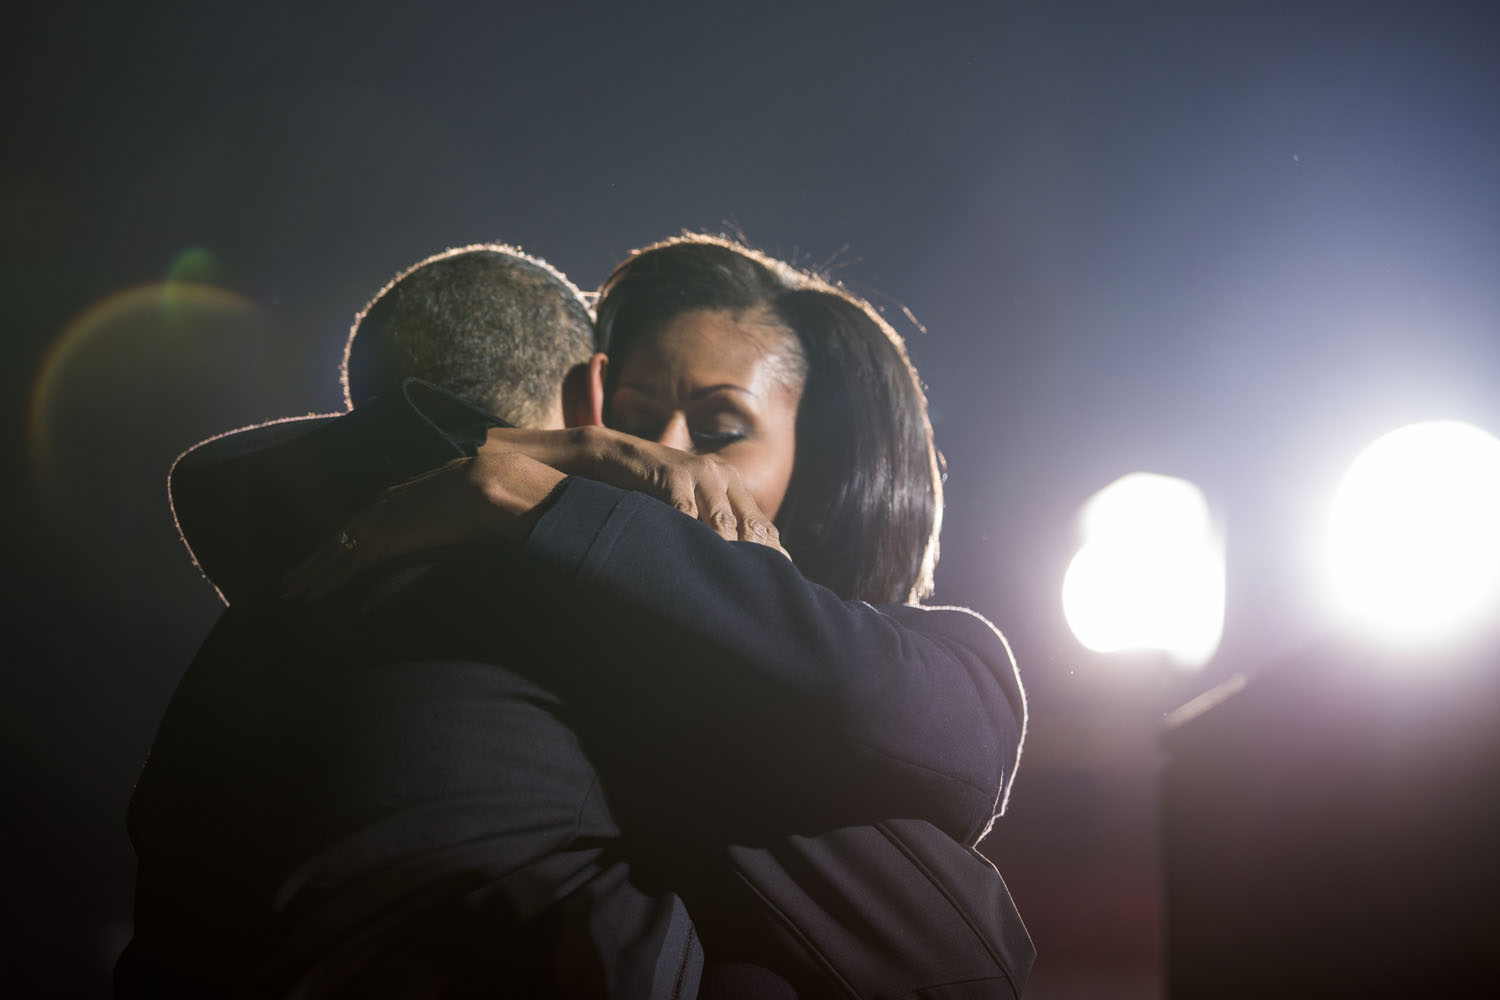 Image: Nov. 5, 2012. Obama hugs the first lady at a campaign rally in Des Moines, Iowa.